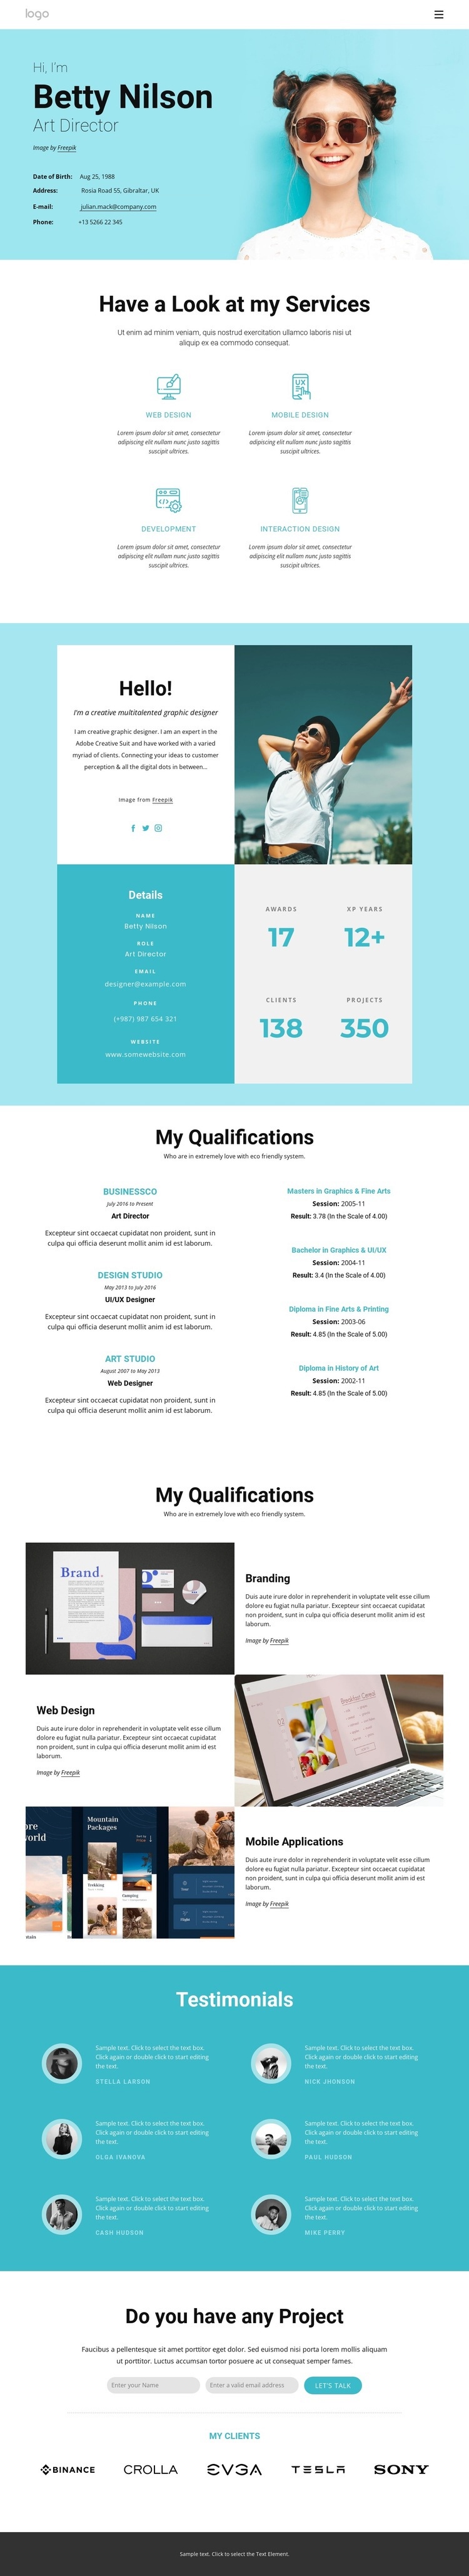 Betty Nilson personal page Elementor Template Alternative